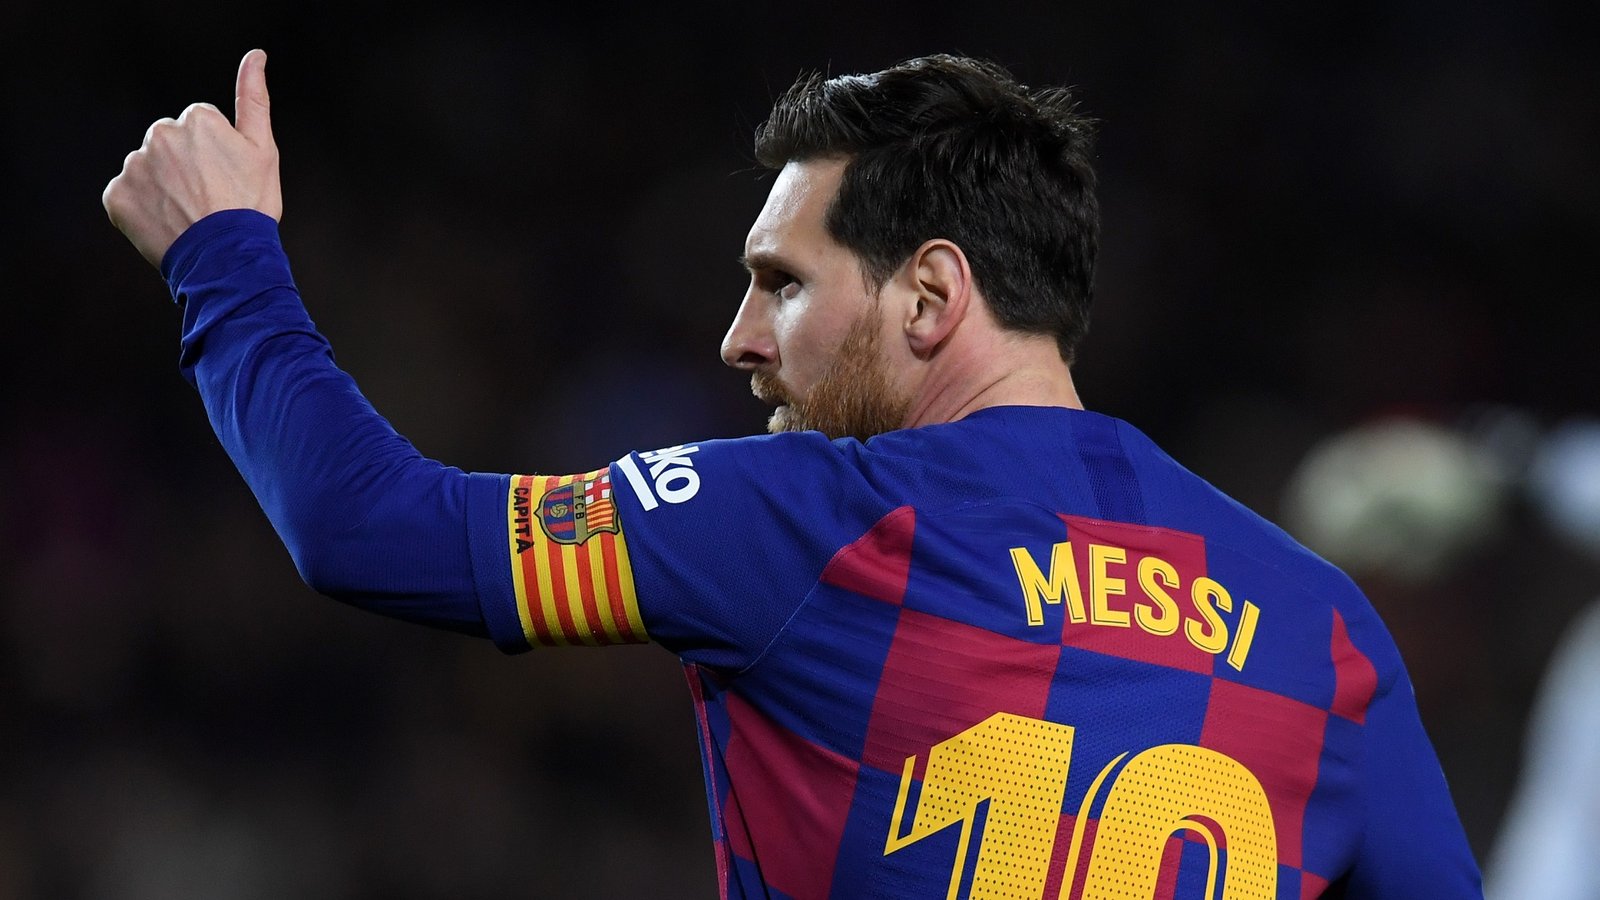 Lionel Messi ultimately chooses to stay with Barcelona Says “My love for Barca will never change”